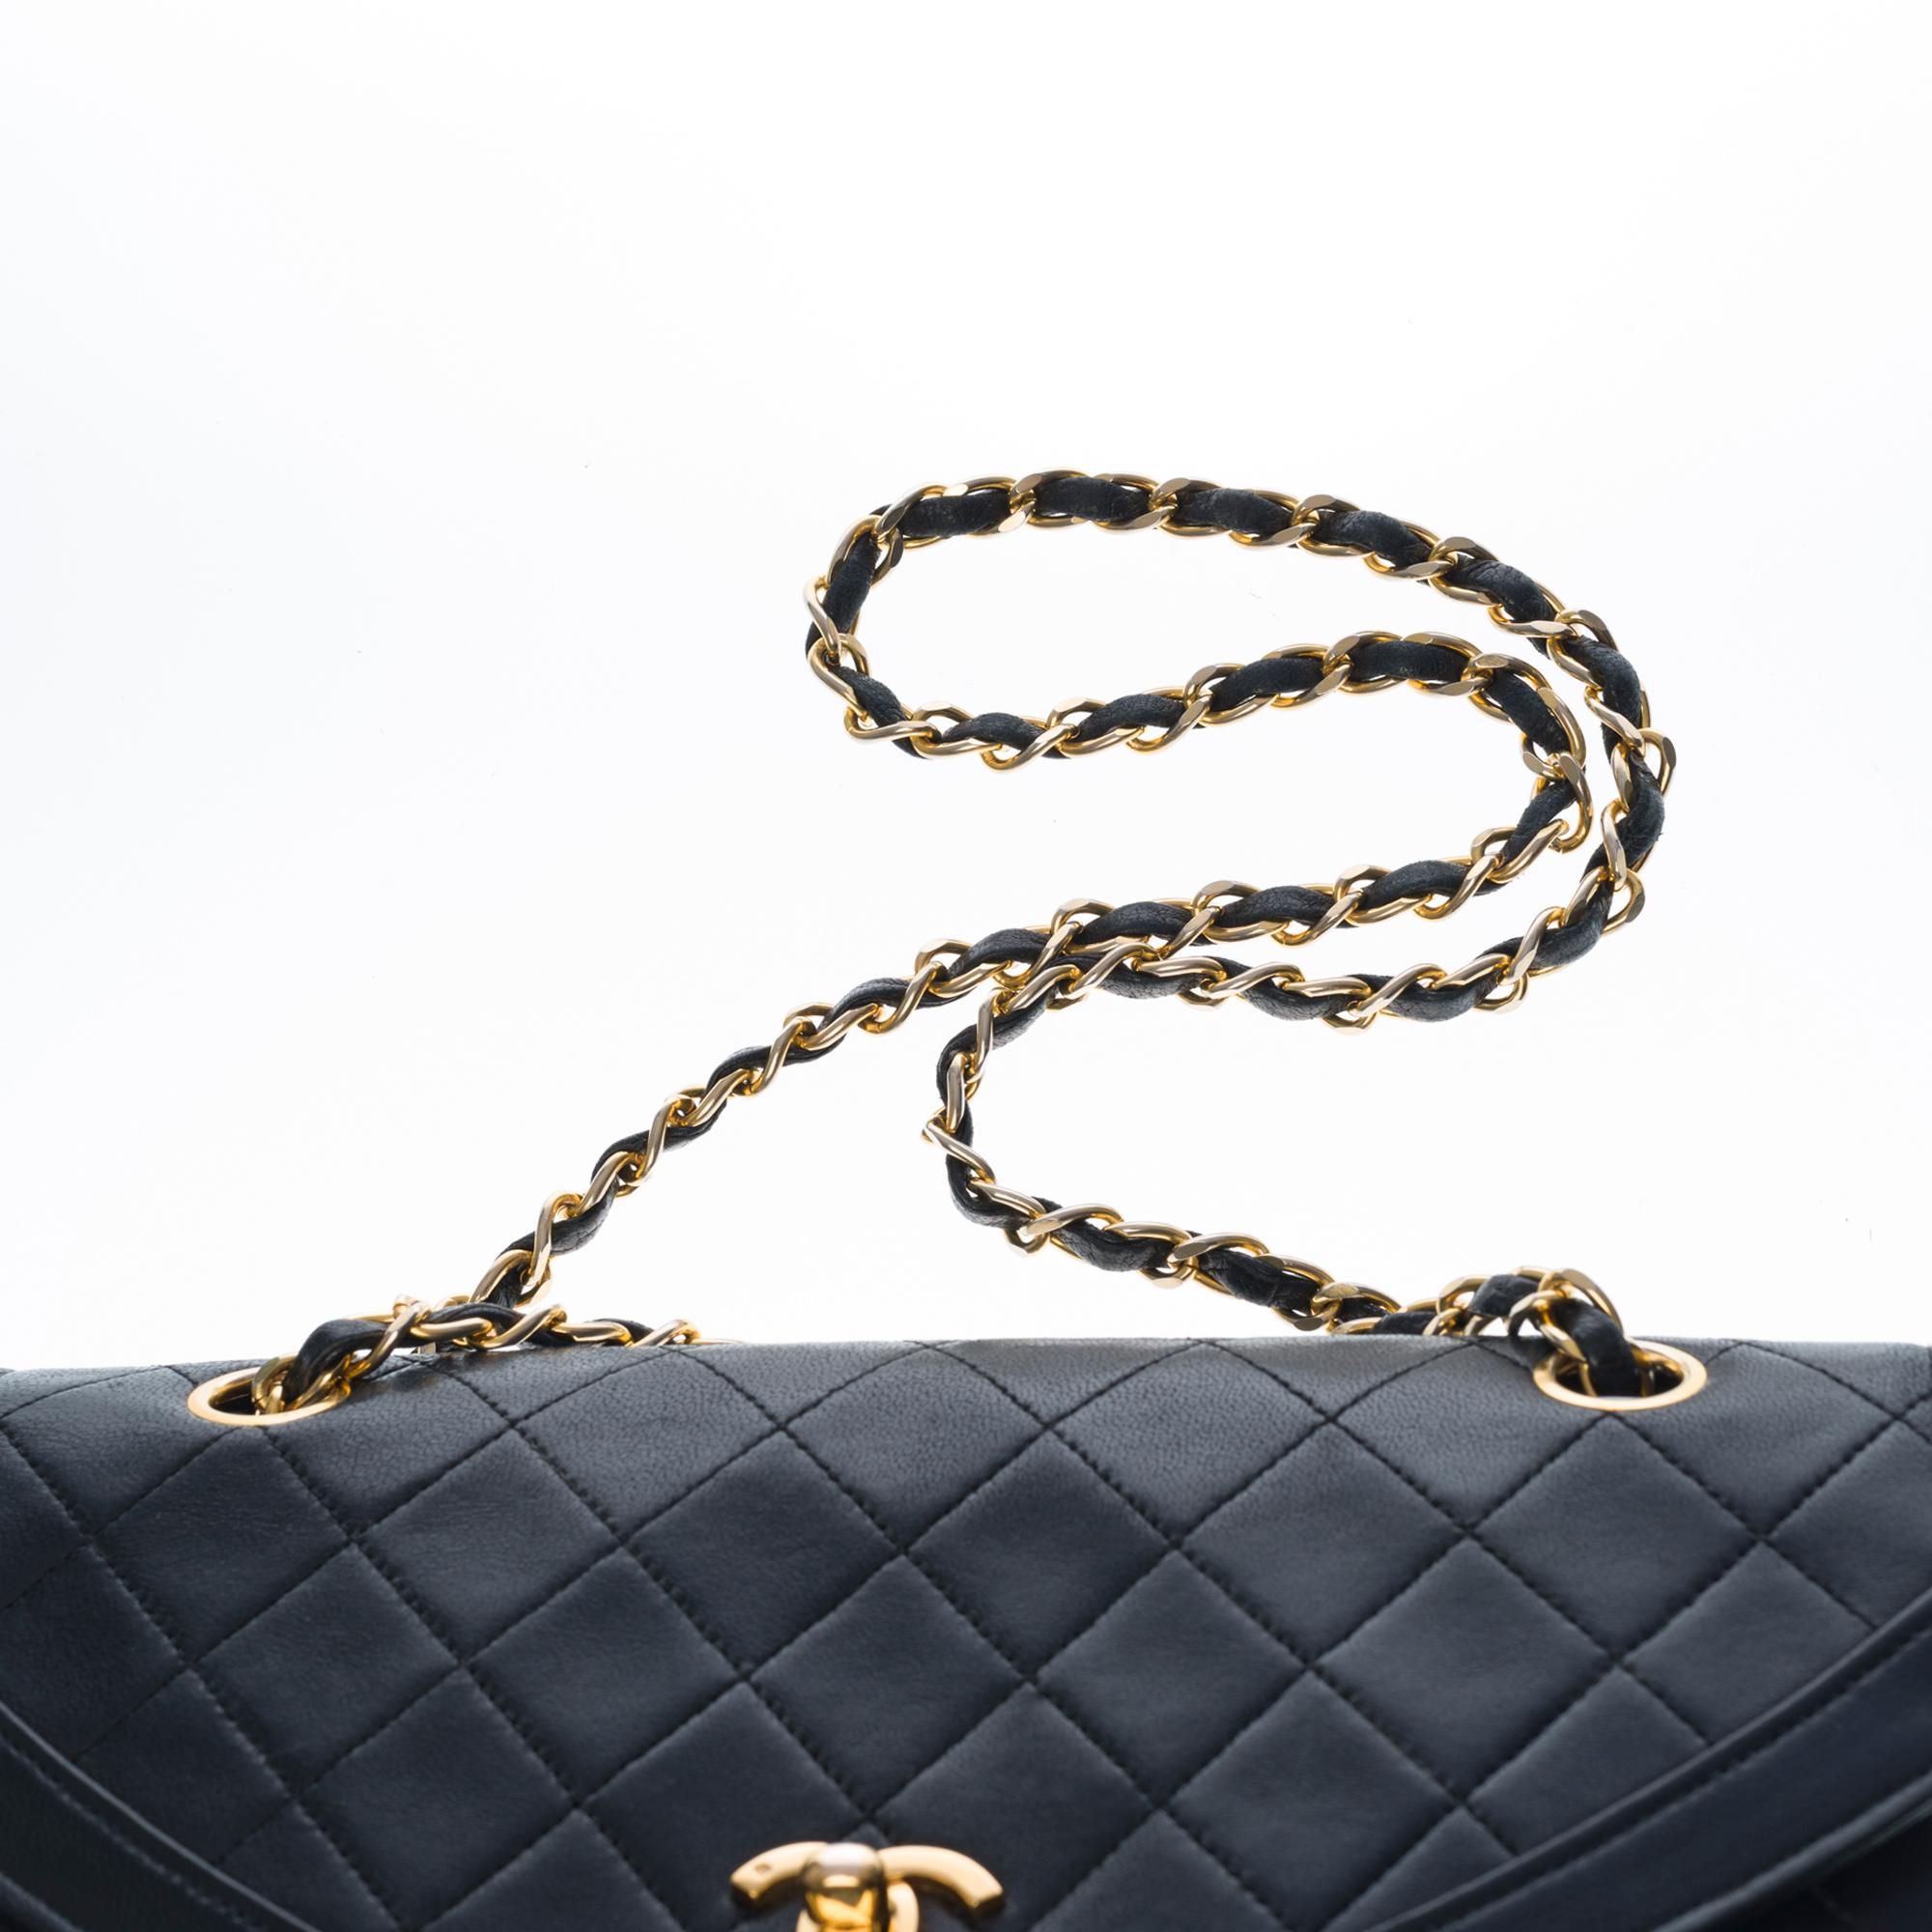 Chanel Classic Flap shoulder bag in black quilted lambskin and gold hardware 3